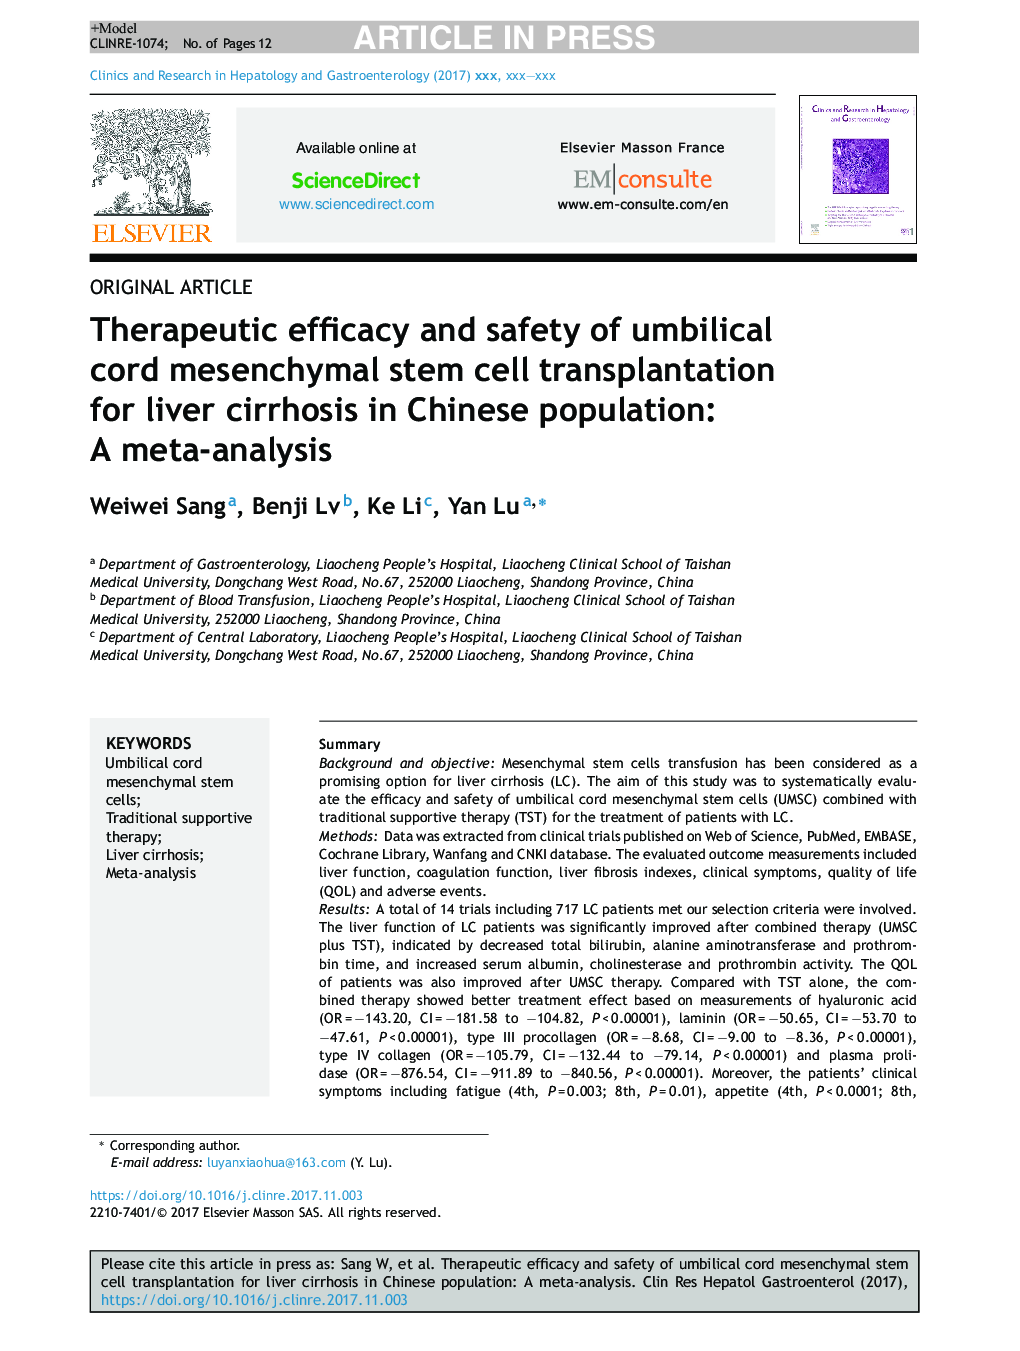 Therapeutic efficacy and safety of umbilical cord mesenchymal stem cell transplantation for liver cirrhosis in Chinese population: A meta-analysis